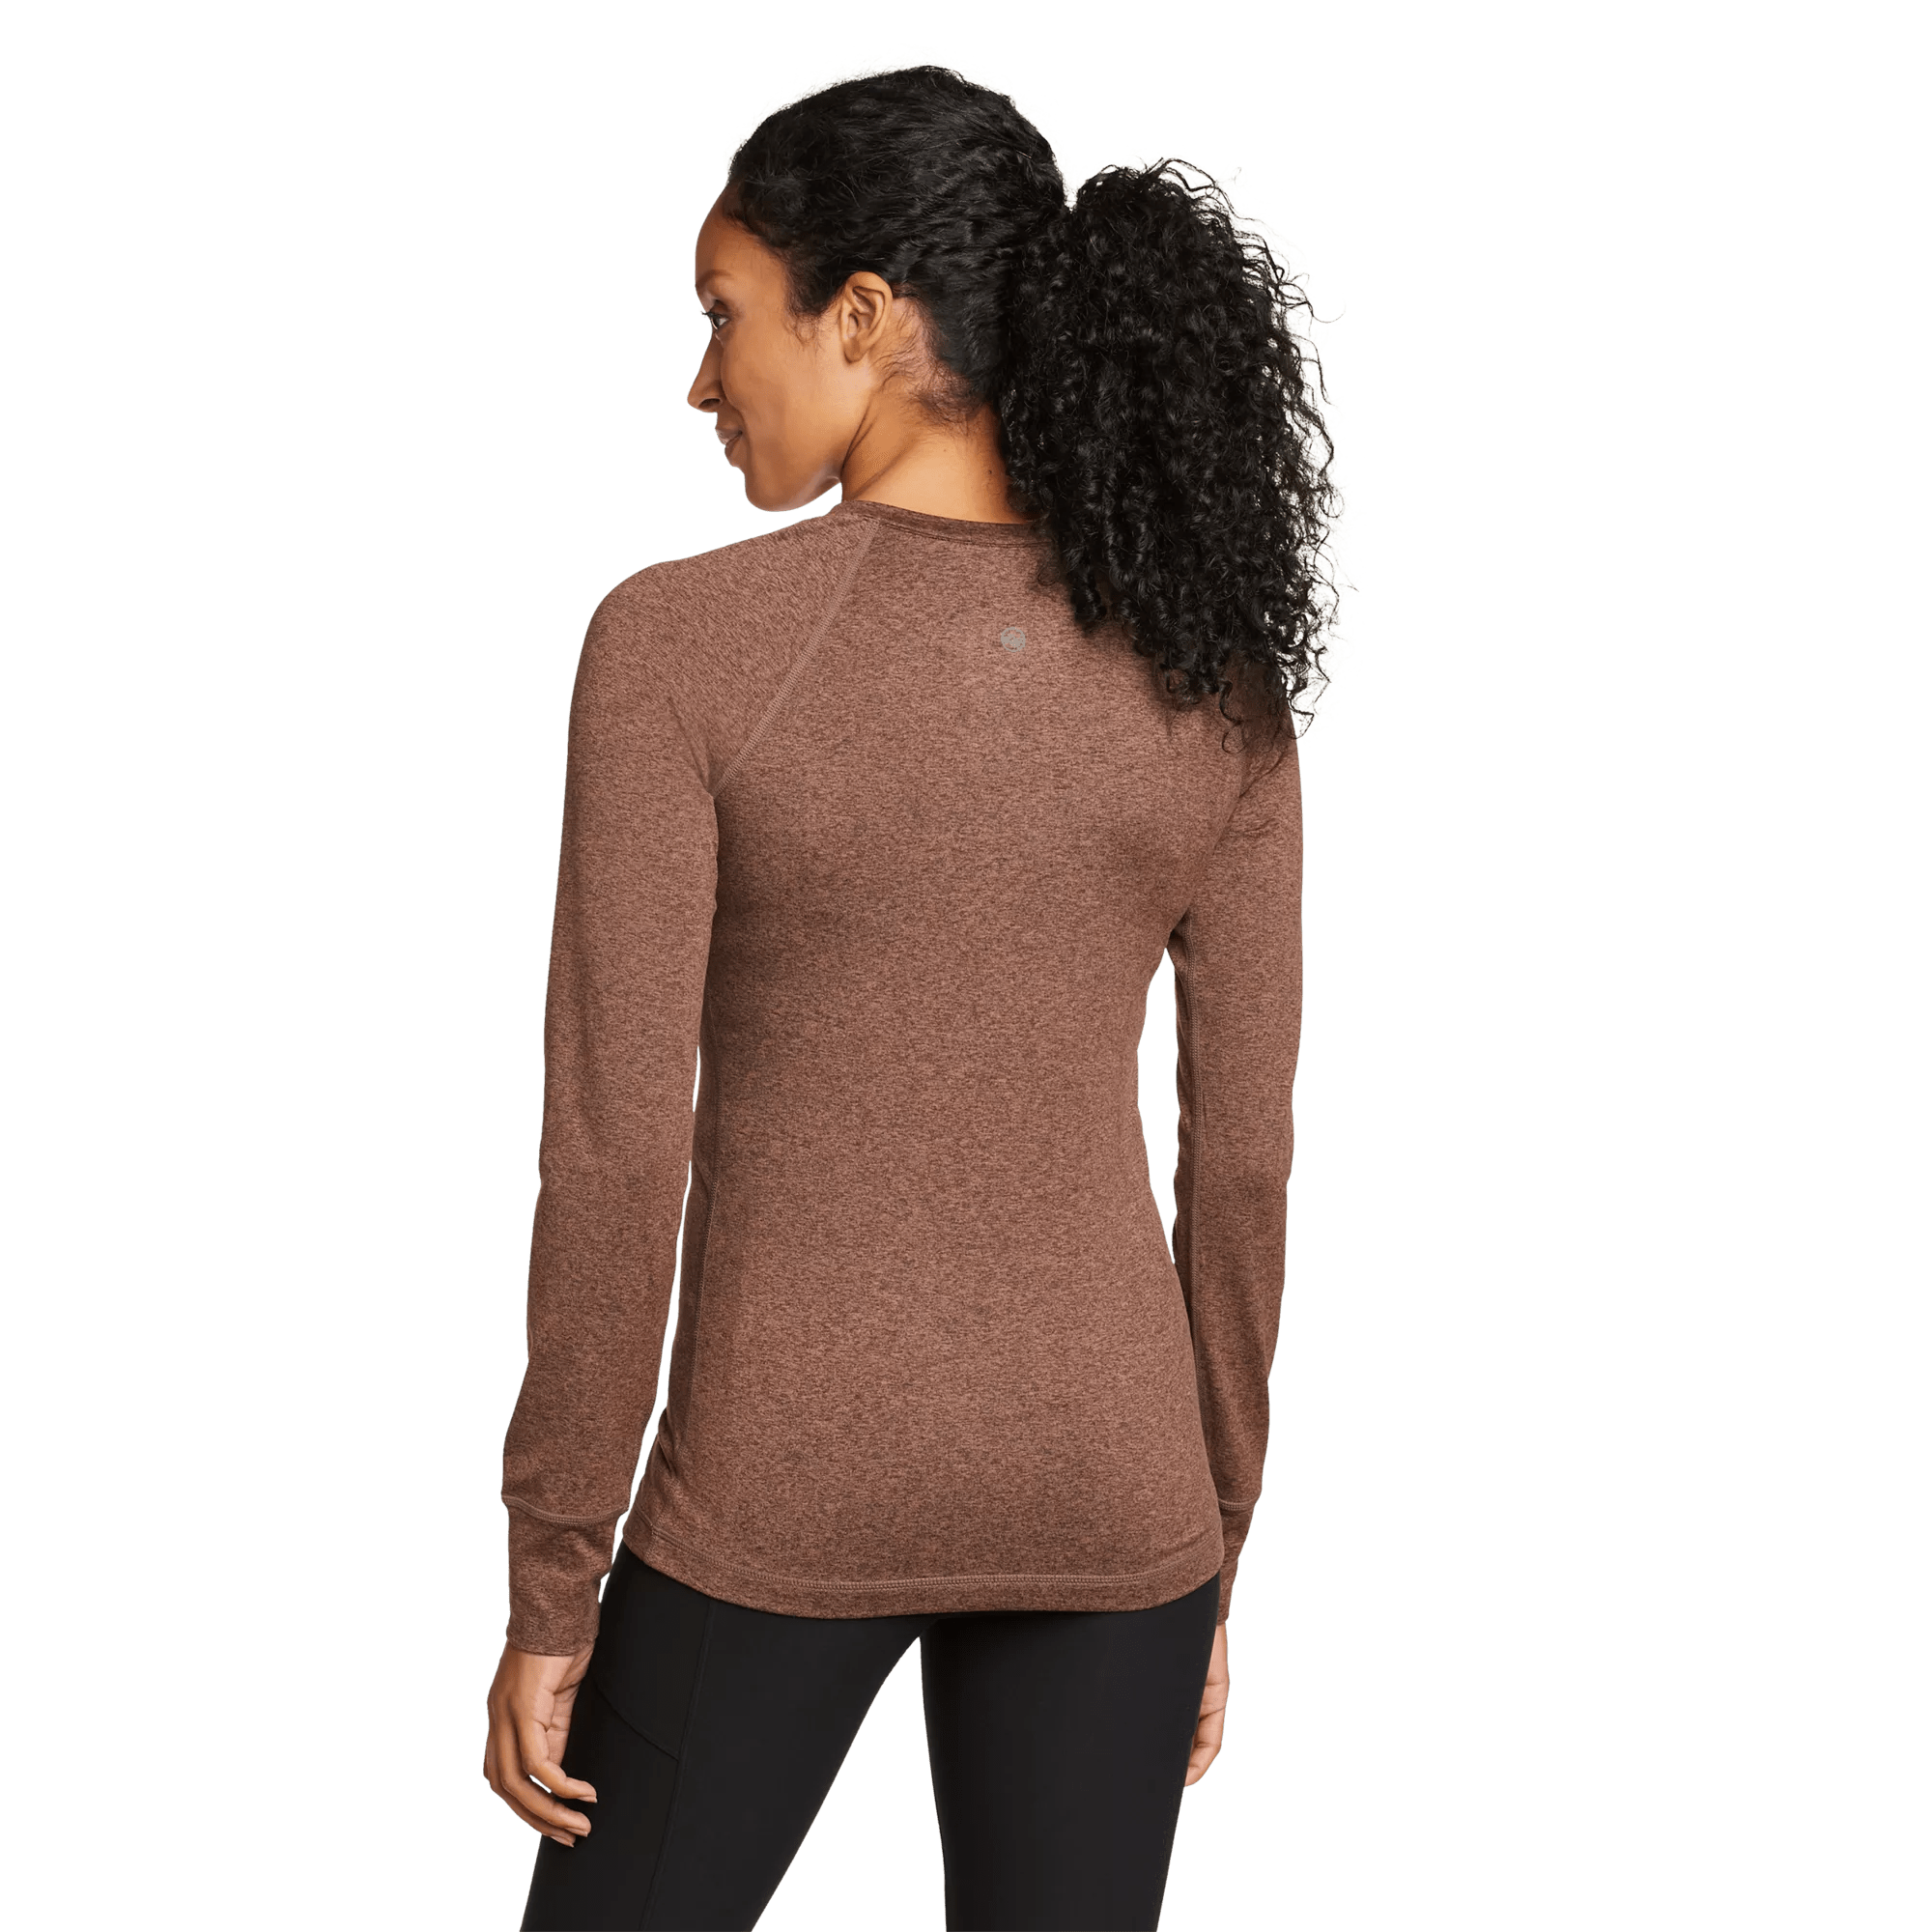 Train Ascent Long-Sleeve Crew Neck Top